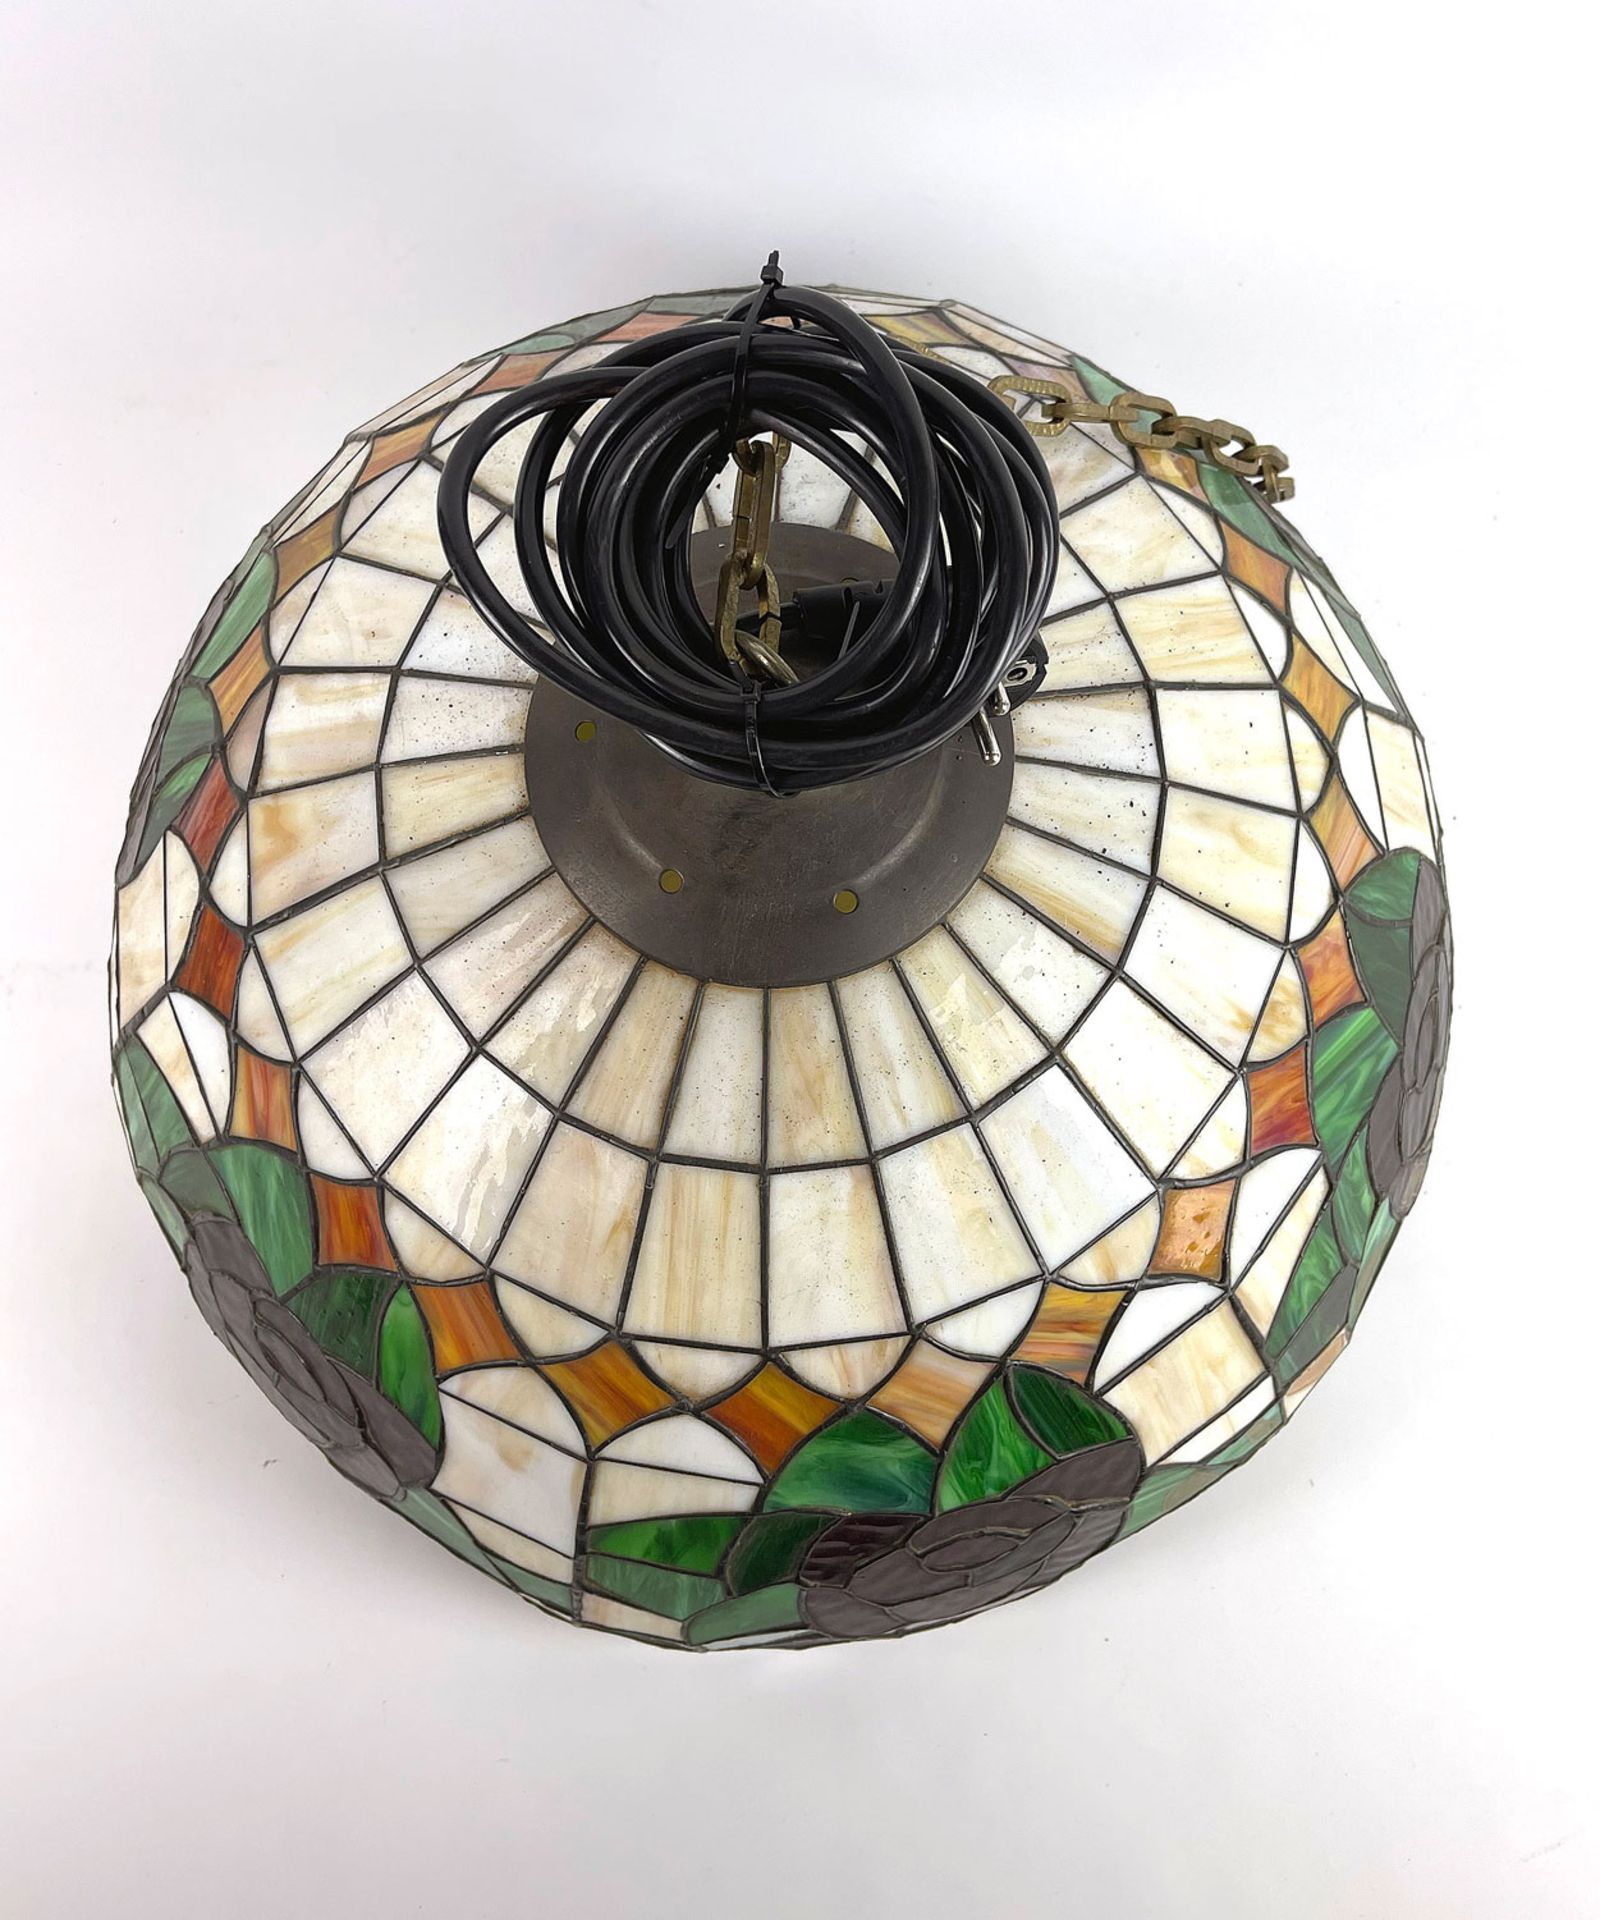 Tiffany Style Hanging Ceiling Lamp with Rose Motif - Image 3 of 4